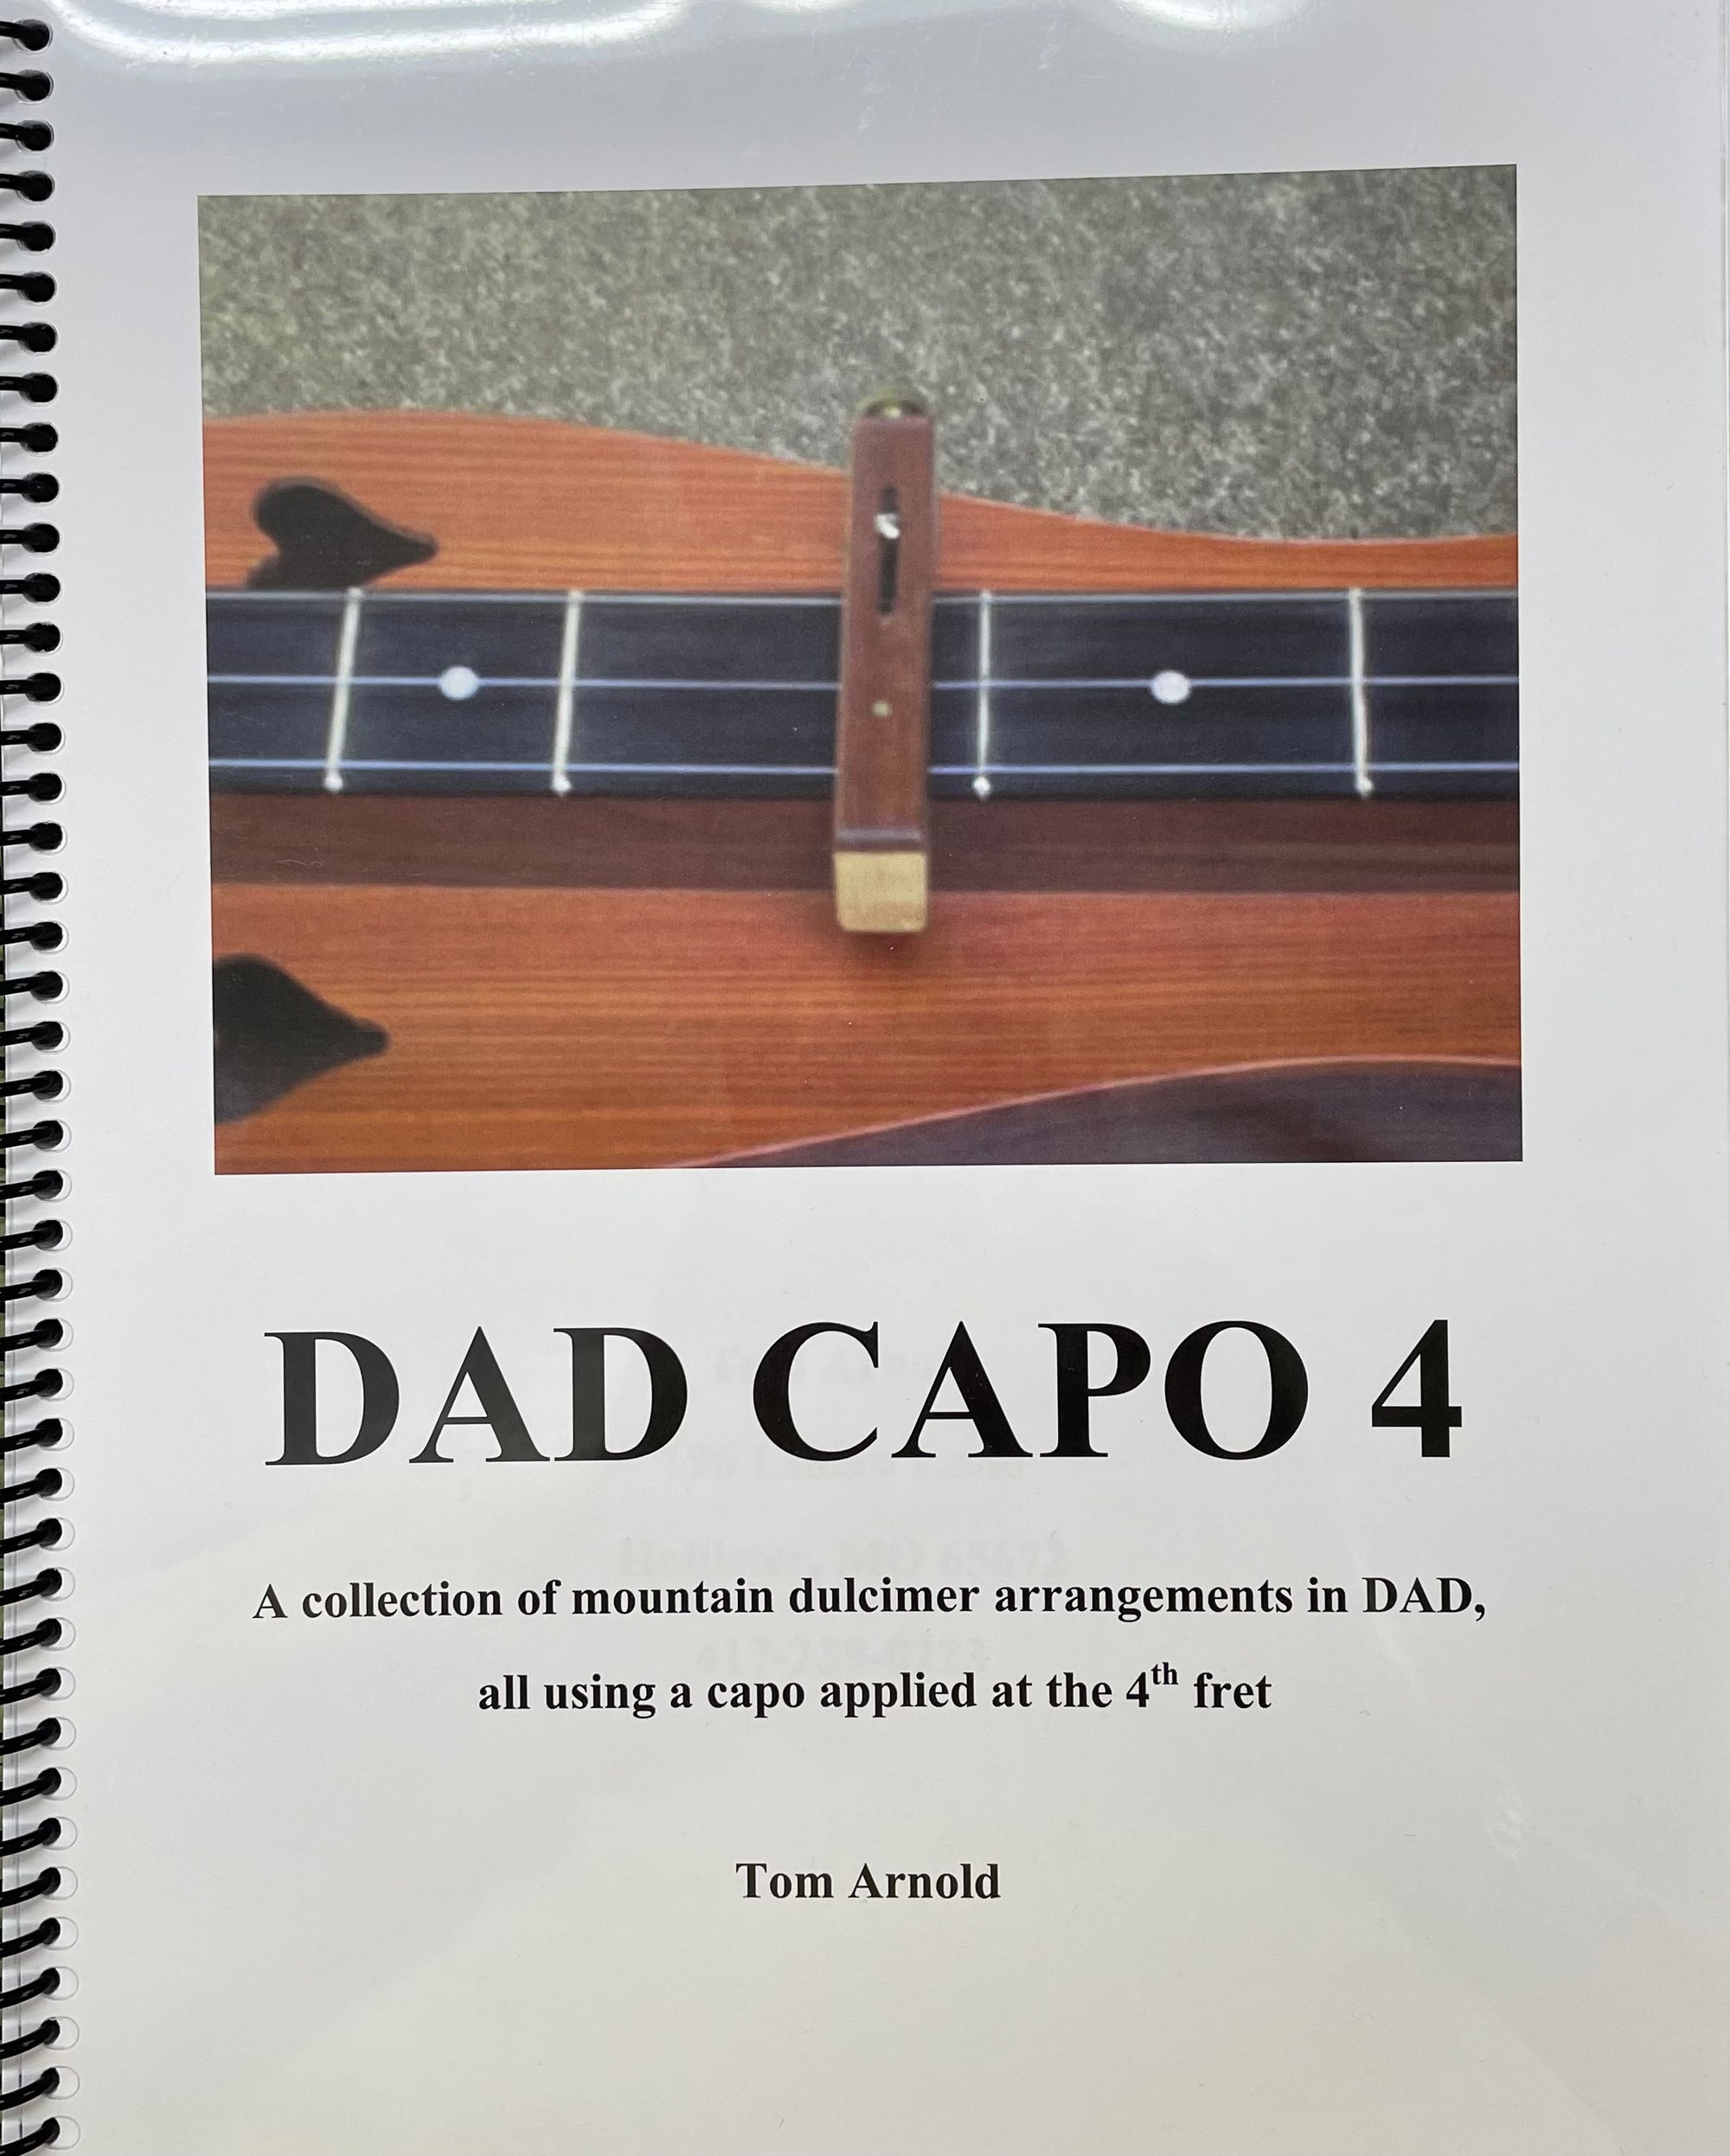 A ukulele with a DAD Capo 4 placed on the fourth fret, tabbed in an old-time tunes collection, featured on the cover of a music book titled "DAD Capo 4" by Tom Arnold.